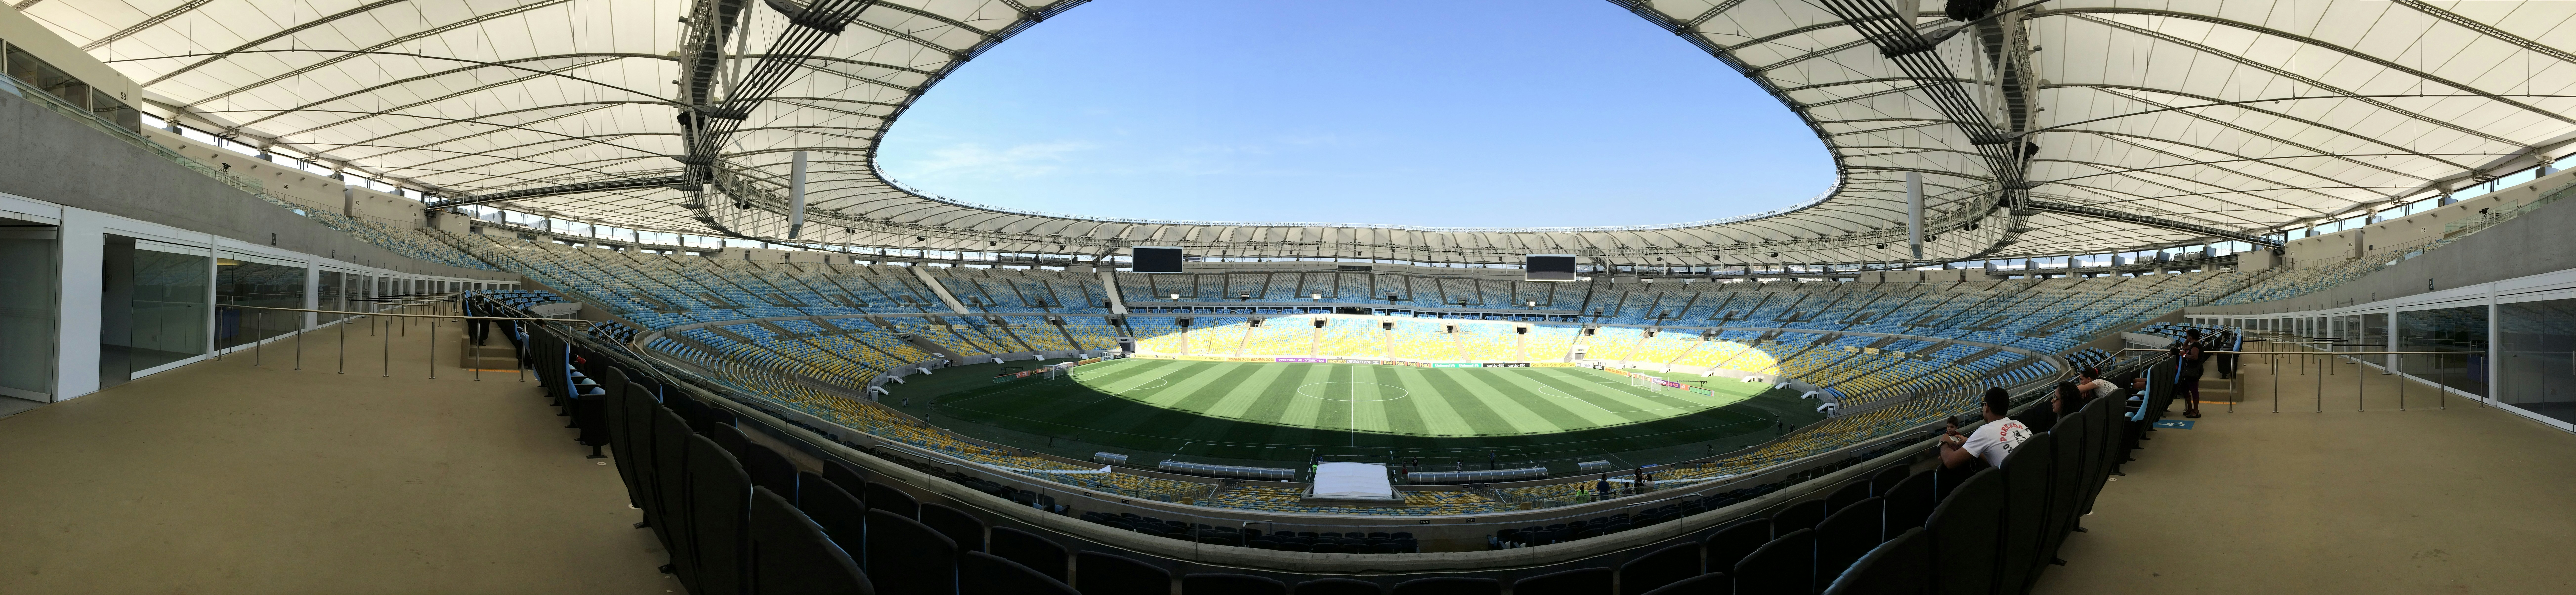 Maracaná stadium one month after the world cup